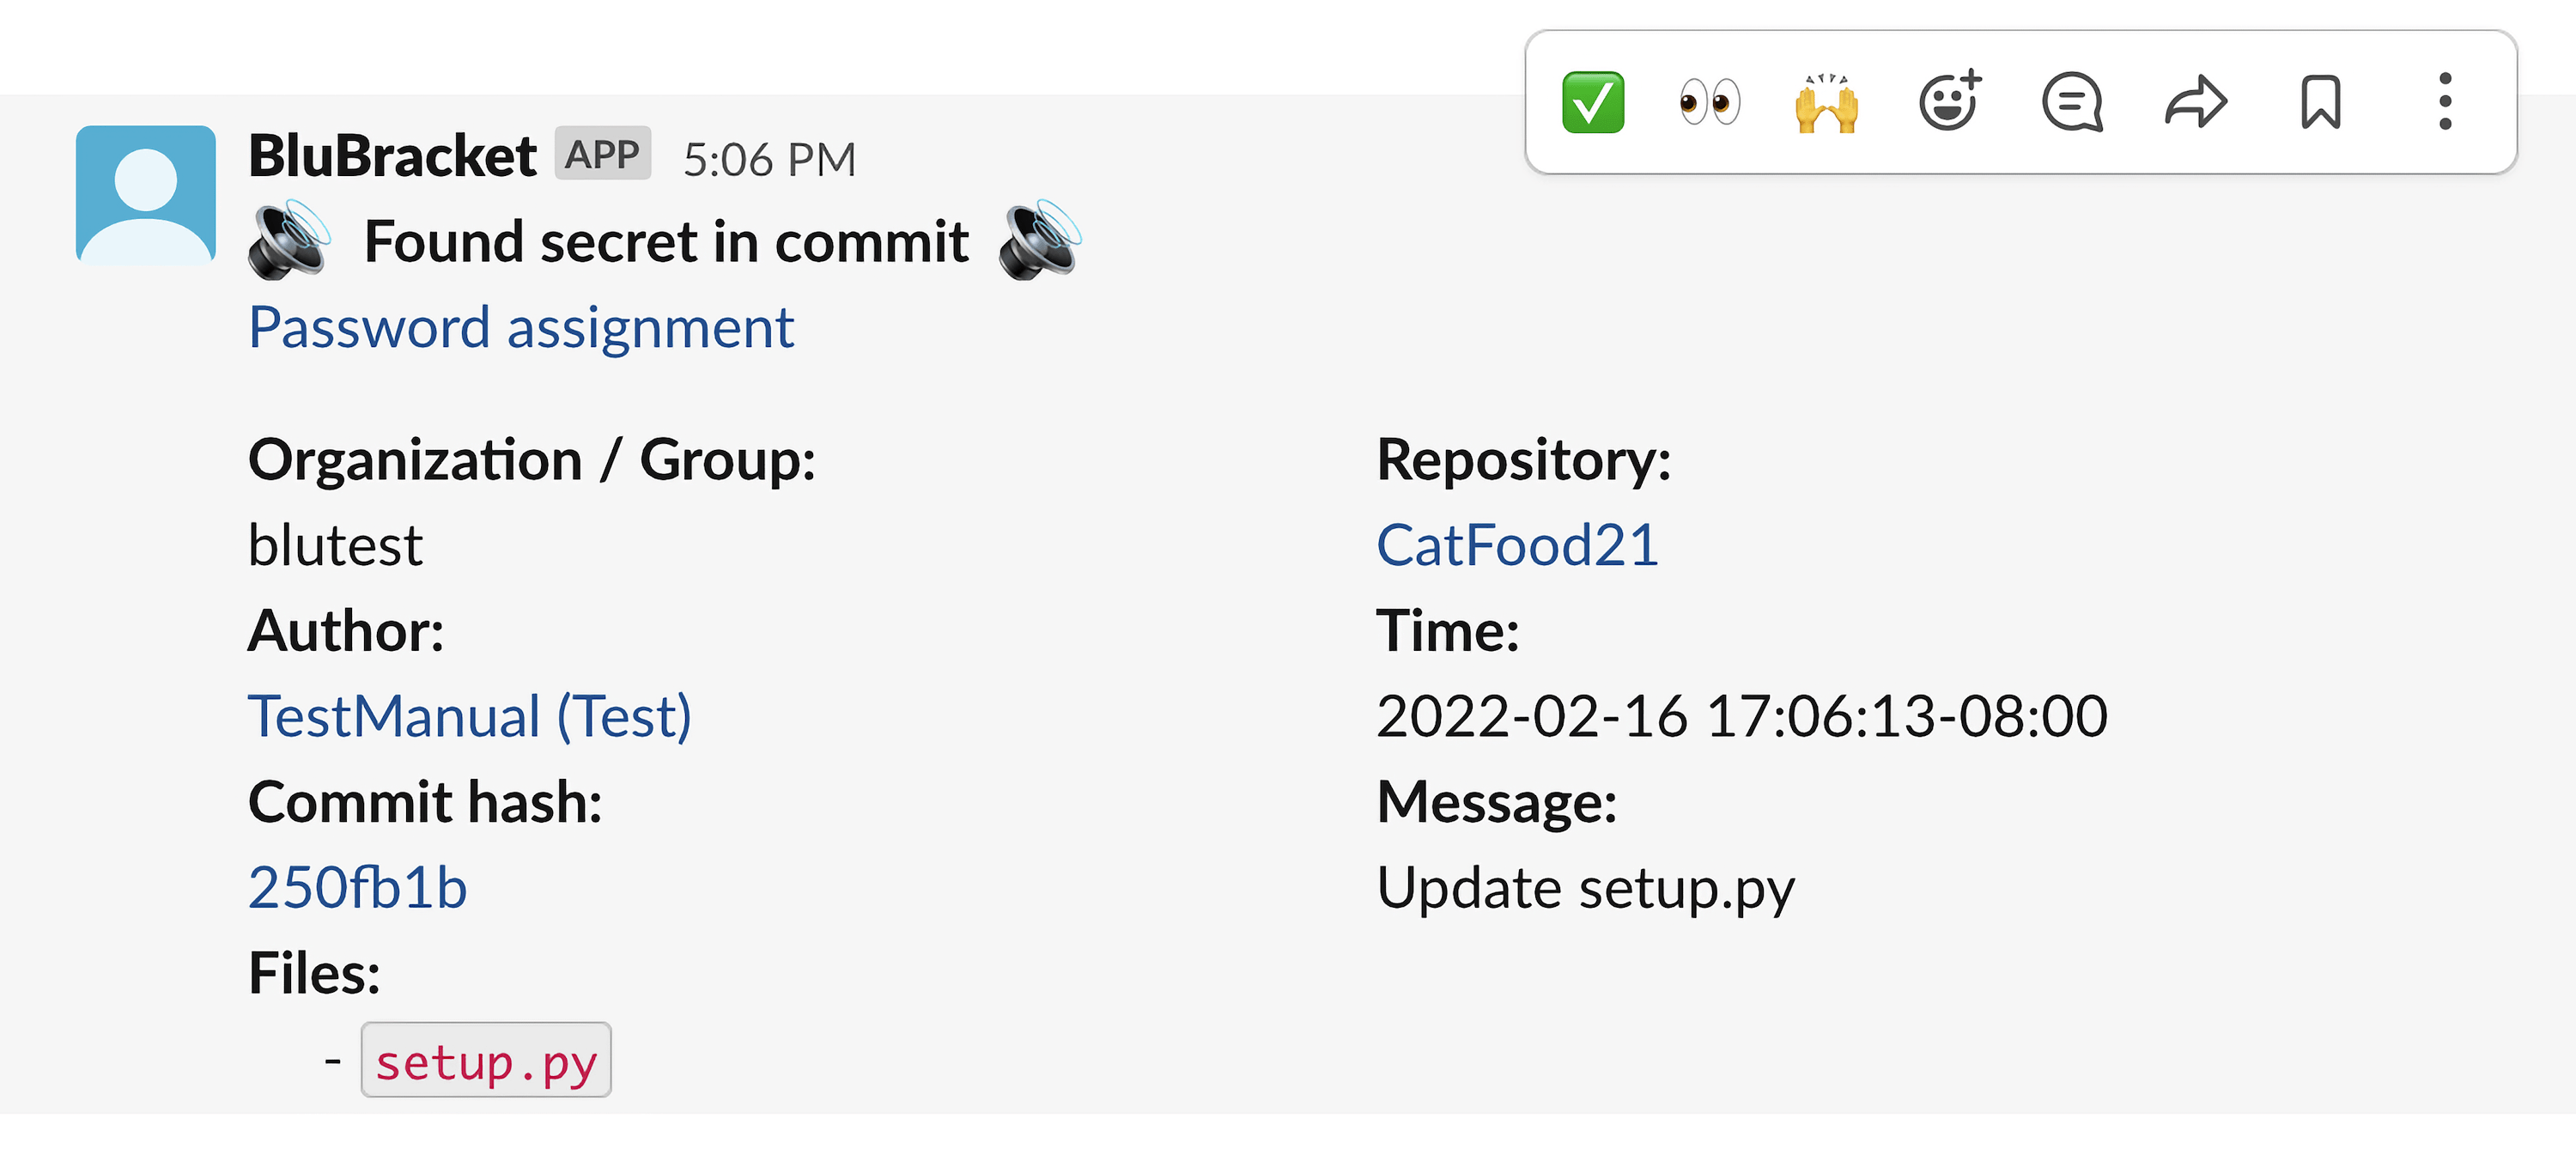 BluBracket integration with Slack can alert teams about code risks in new commits in real time.